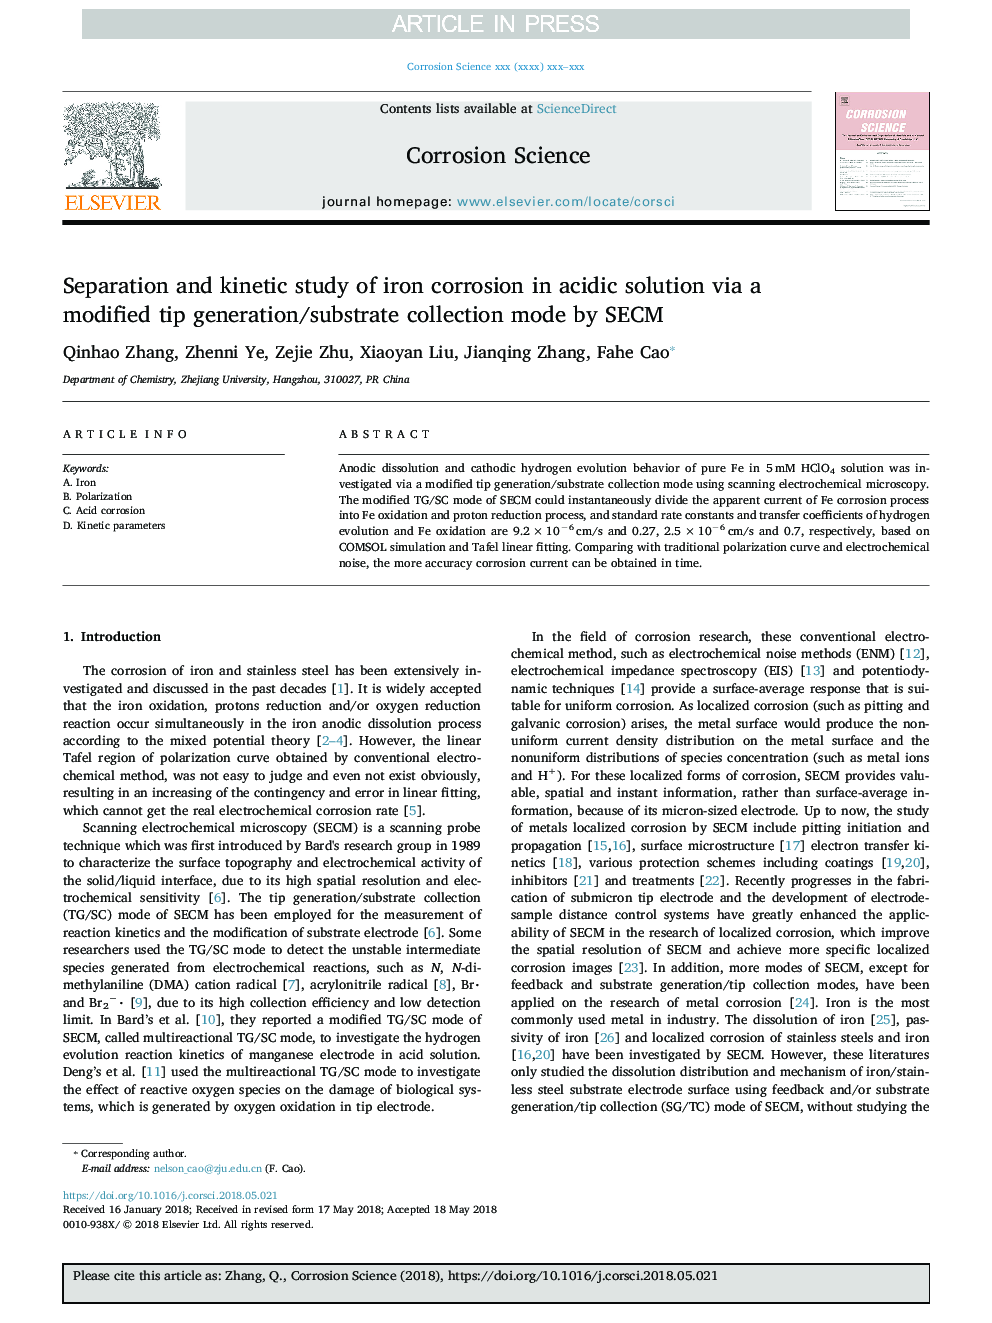 Separation and kinetic study of iron corrosion in acidic solution via a modified tip generation/substrate collection mode by SECM